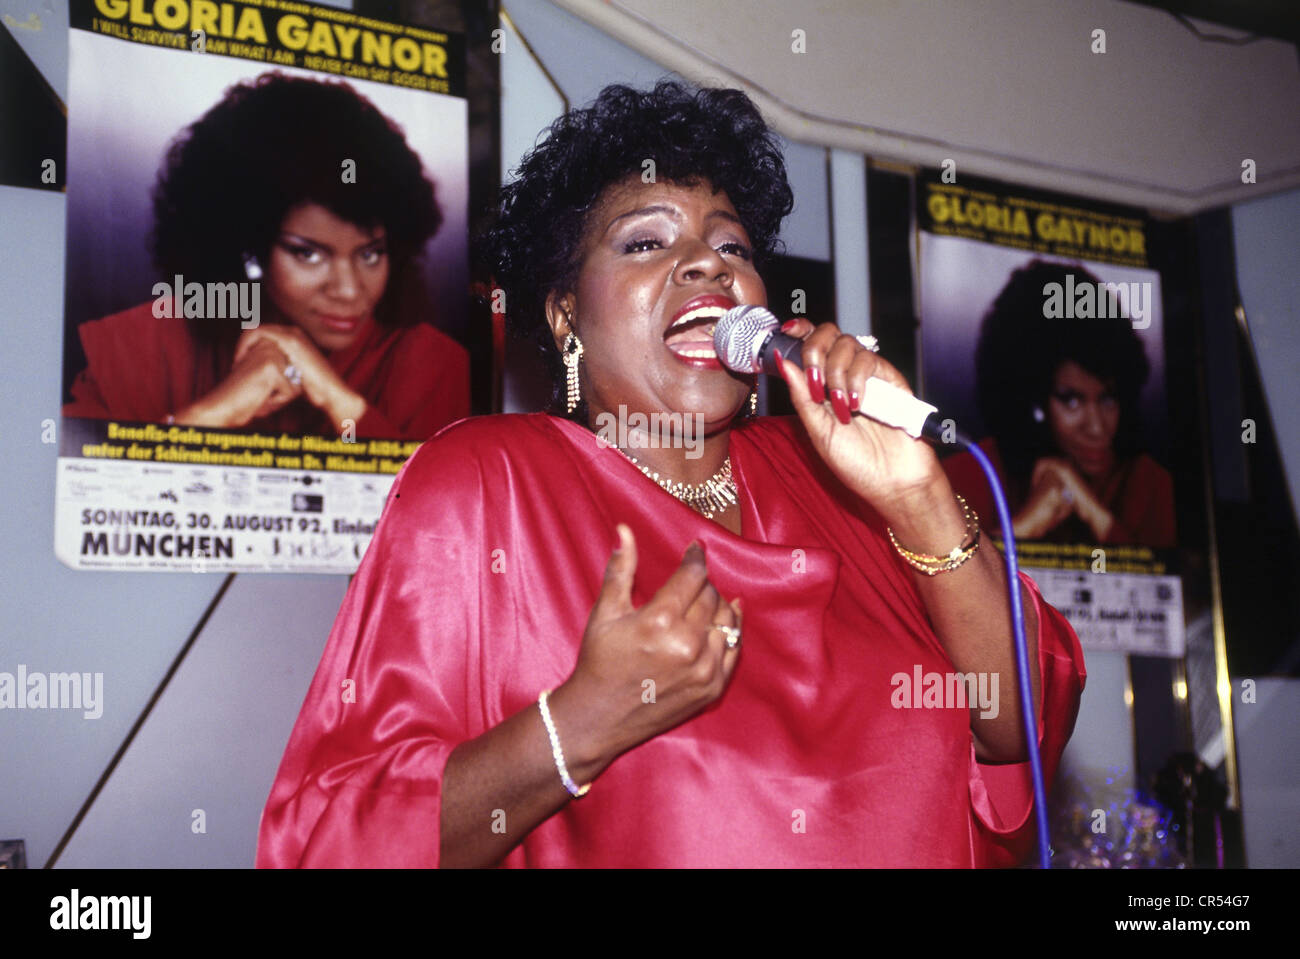 Gaynor, Gloria, * 7.9.1949, US American singer, half length, during a performance for the press, Munich, Germany, 1992, Stock Photo